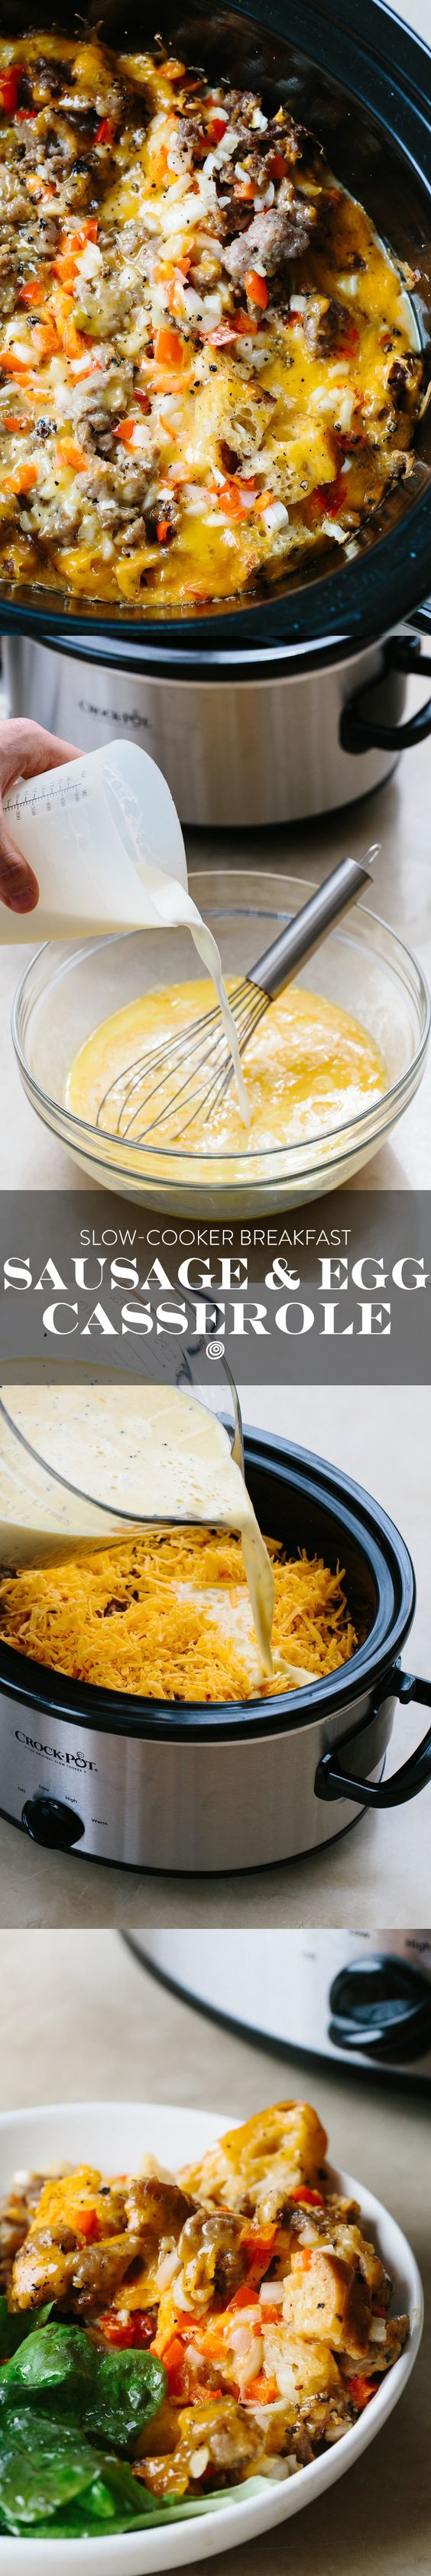 Crockpot Breakfast Casserole With Bread
 How to make sausage Egg and cheese and Breakfast